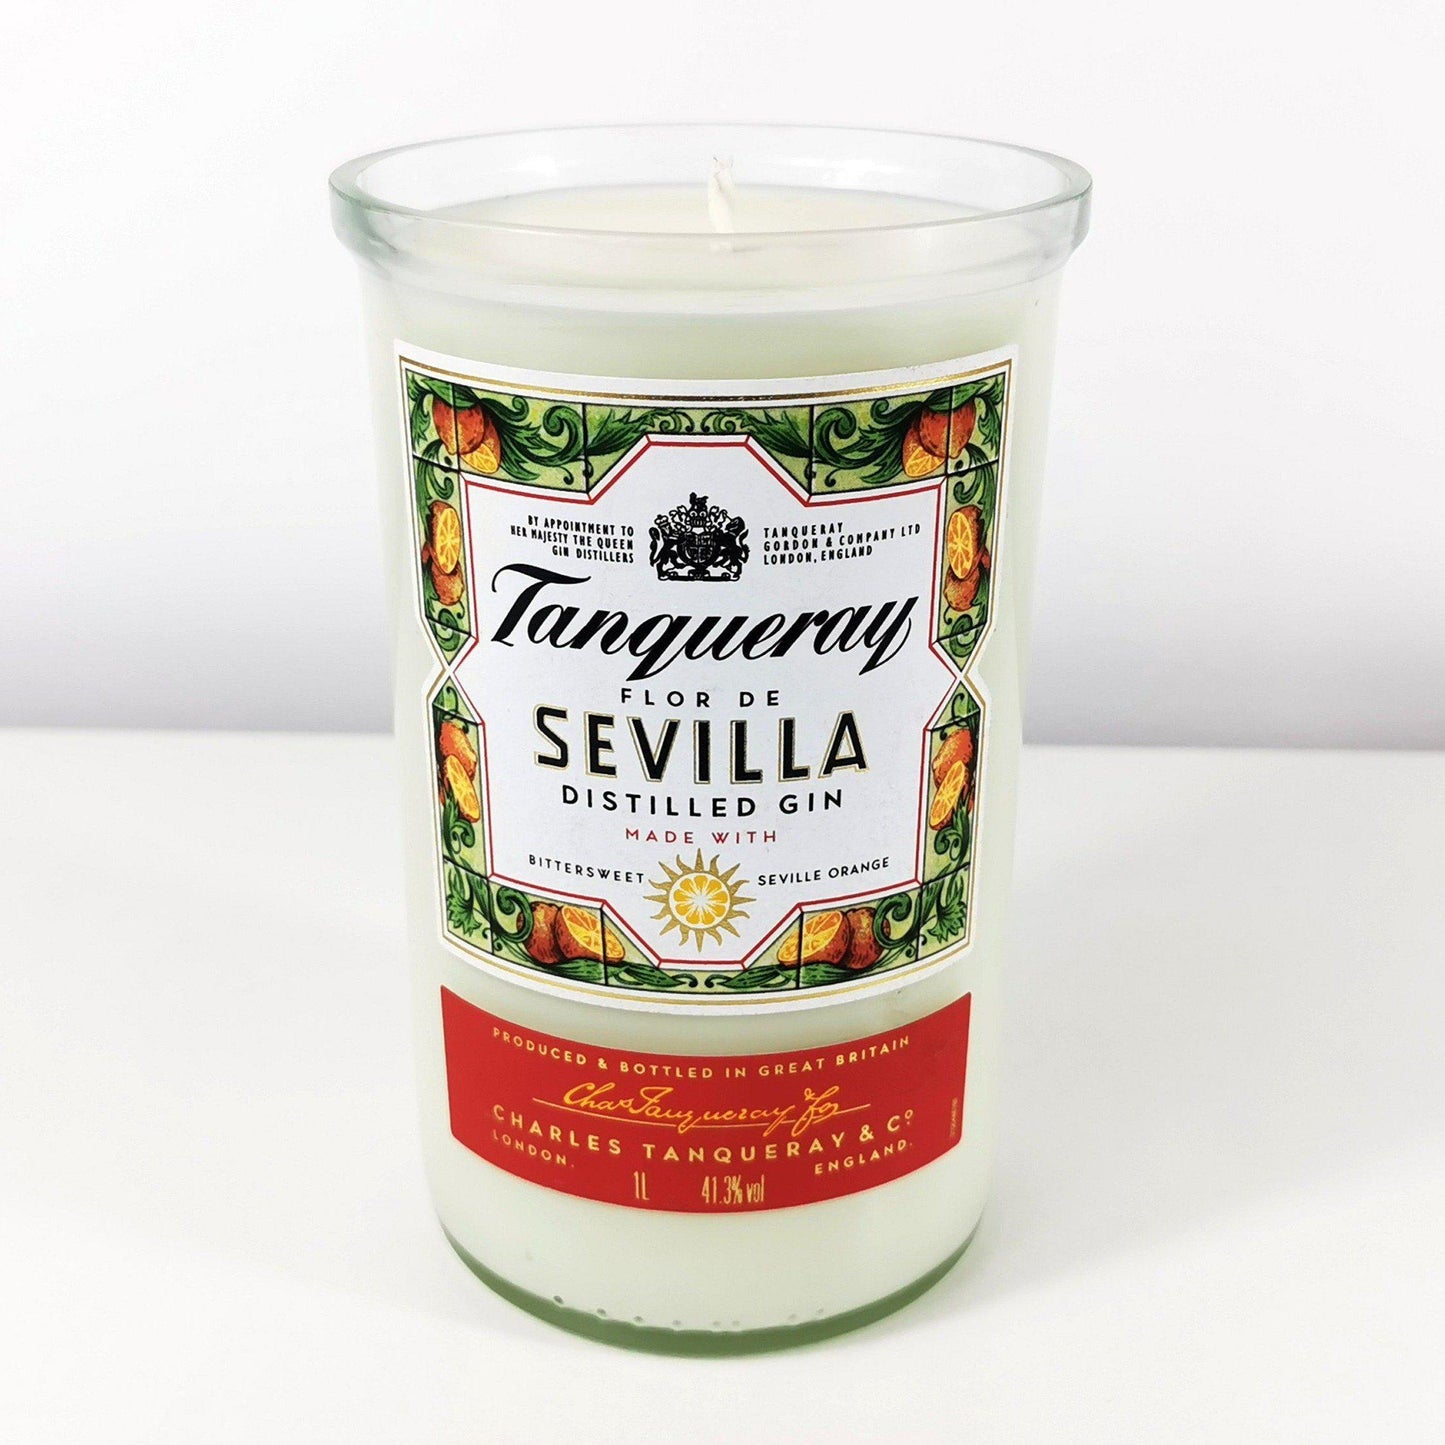 Tanqueray Sevilla Gin Bottle Candle 1L Gin Bottle Candles Adhock Homeware